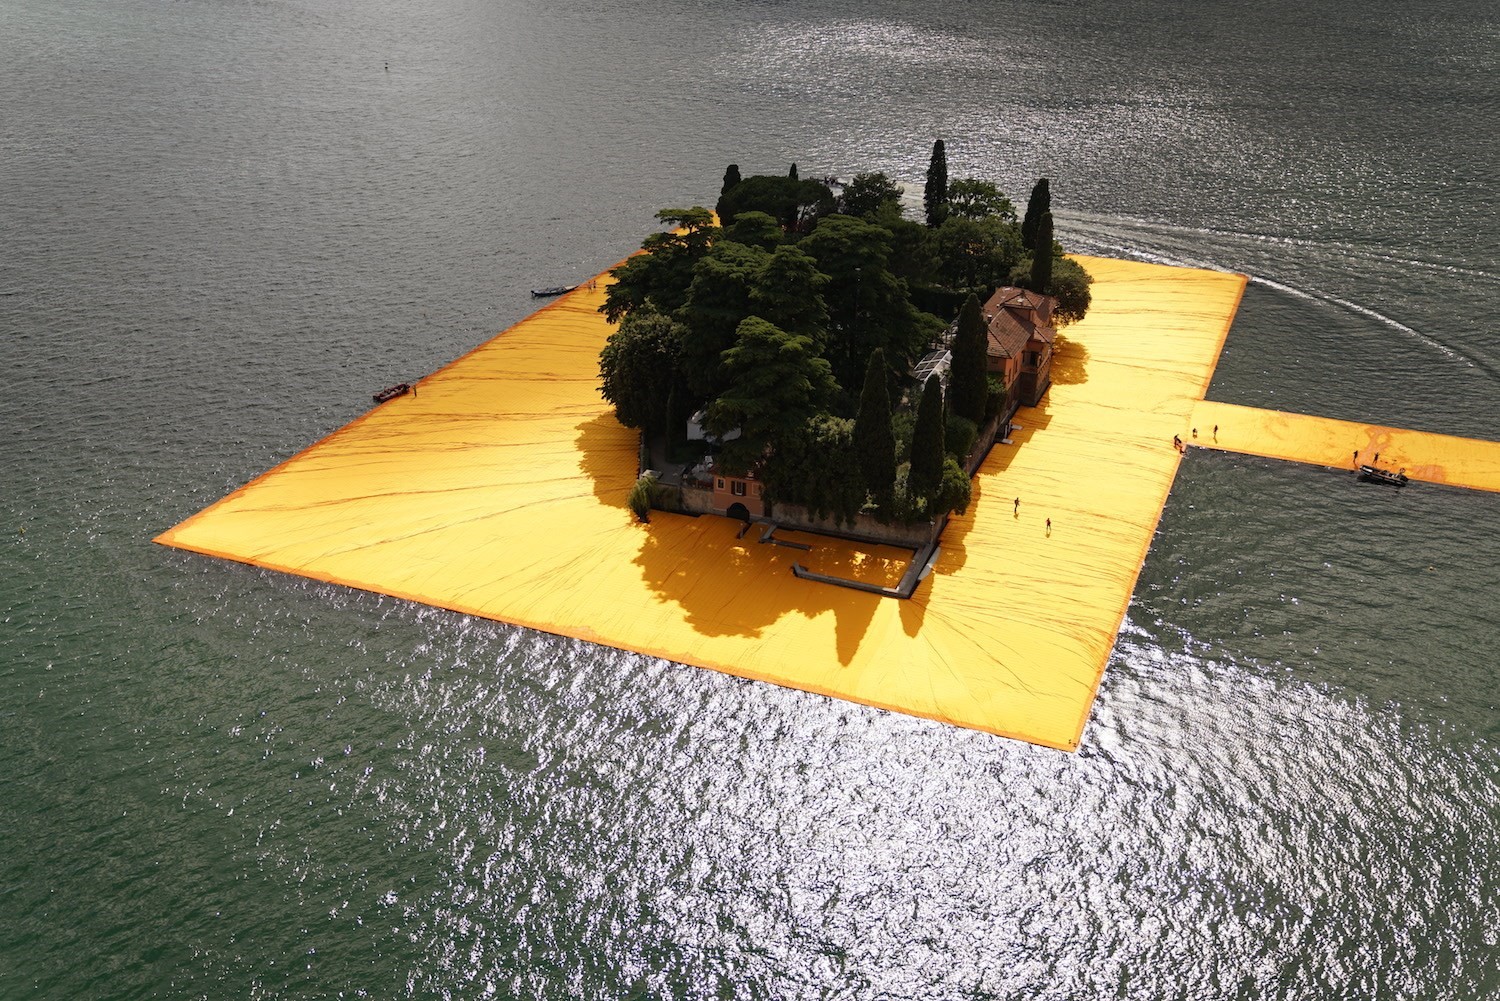 The Floating Piers - The Floating Piers, Lake Iseo